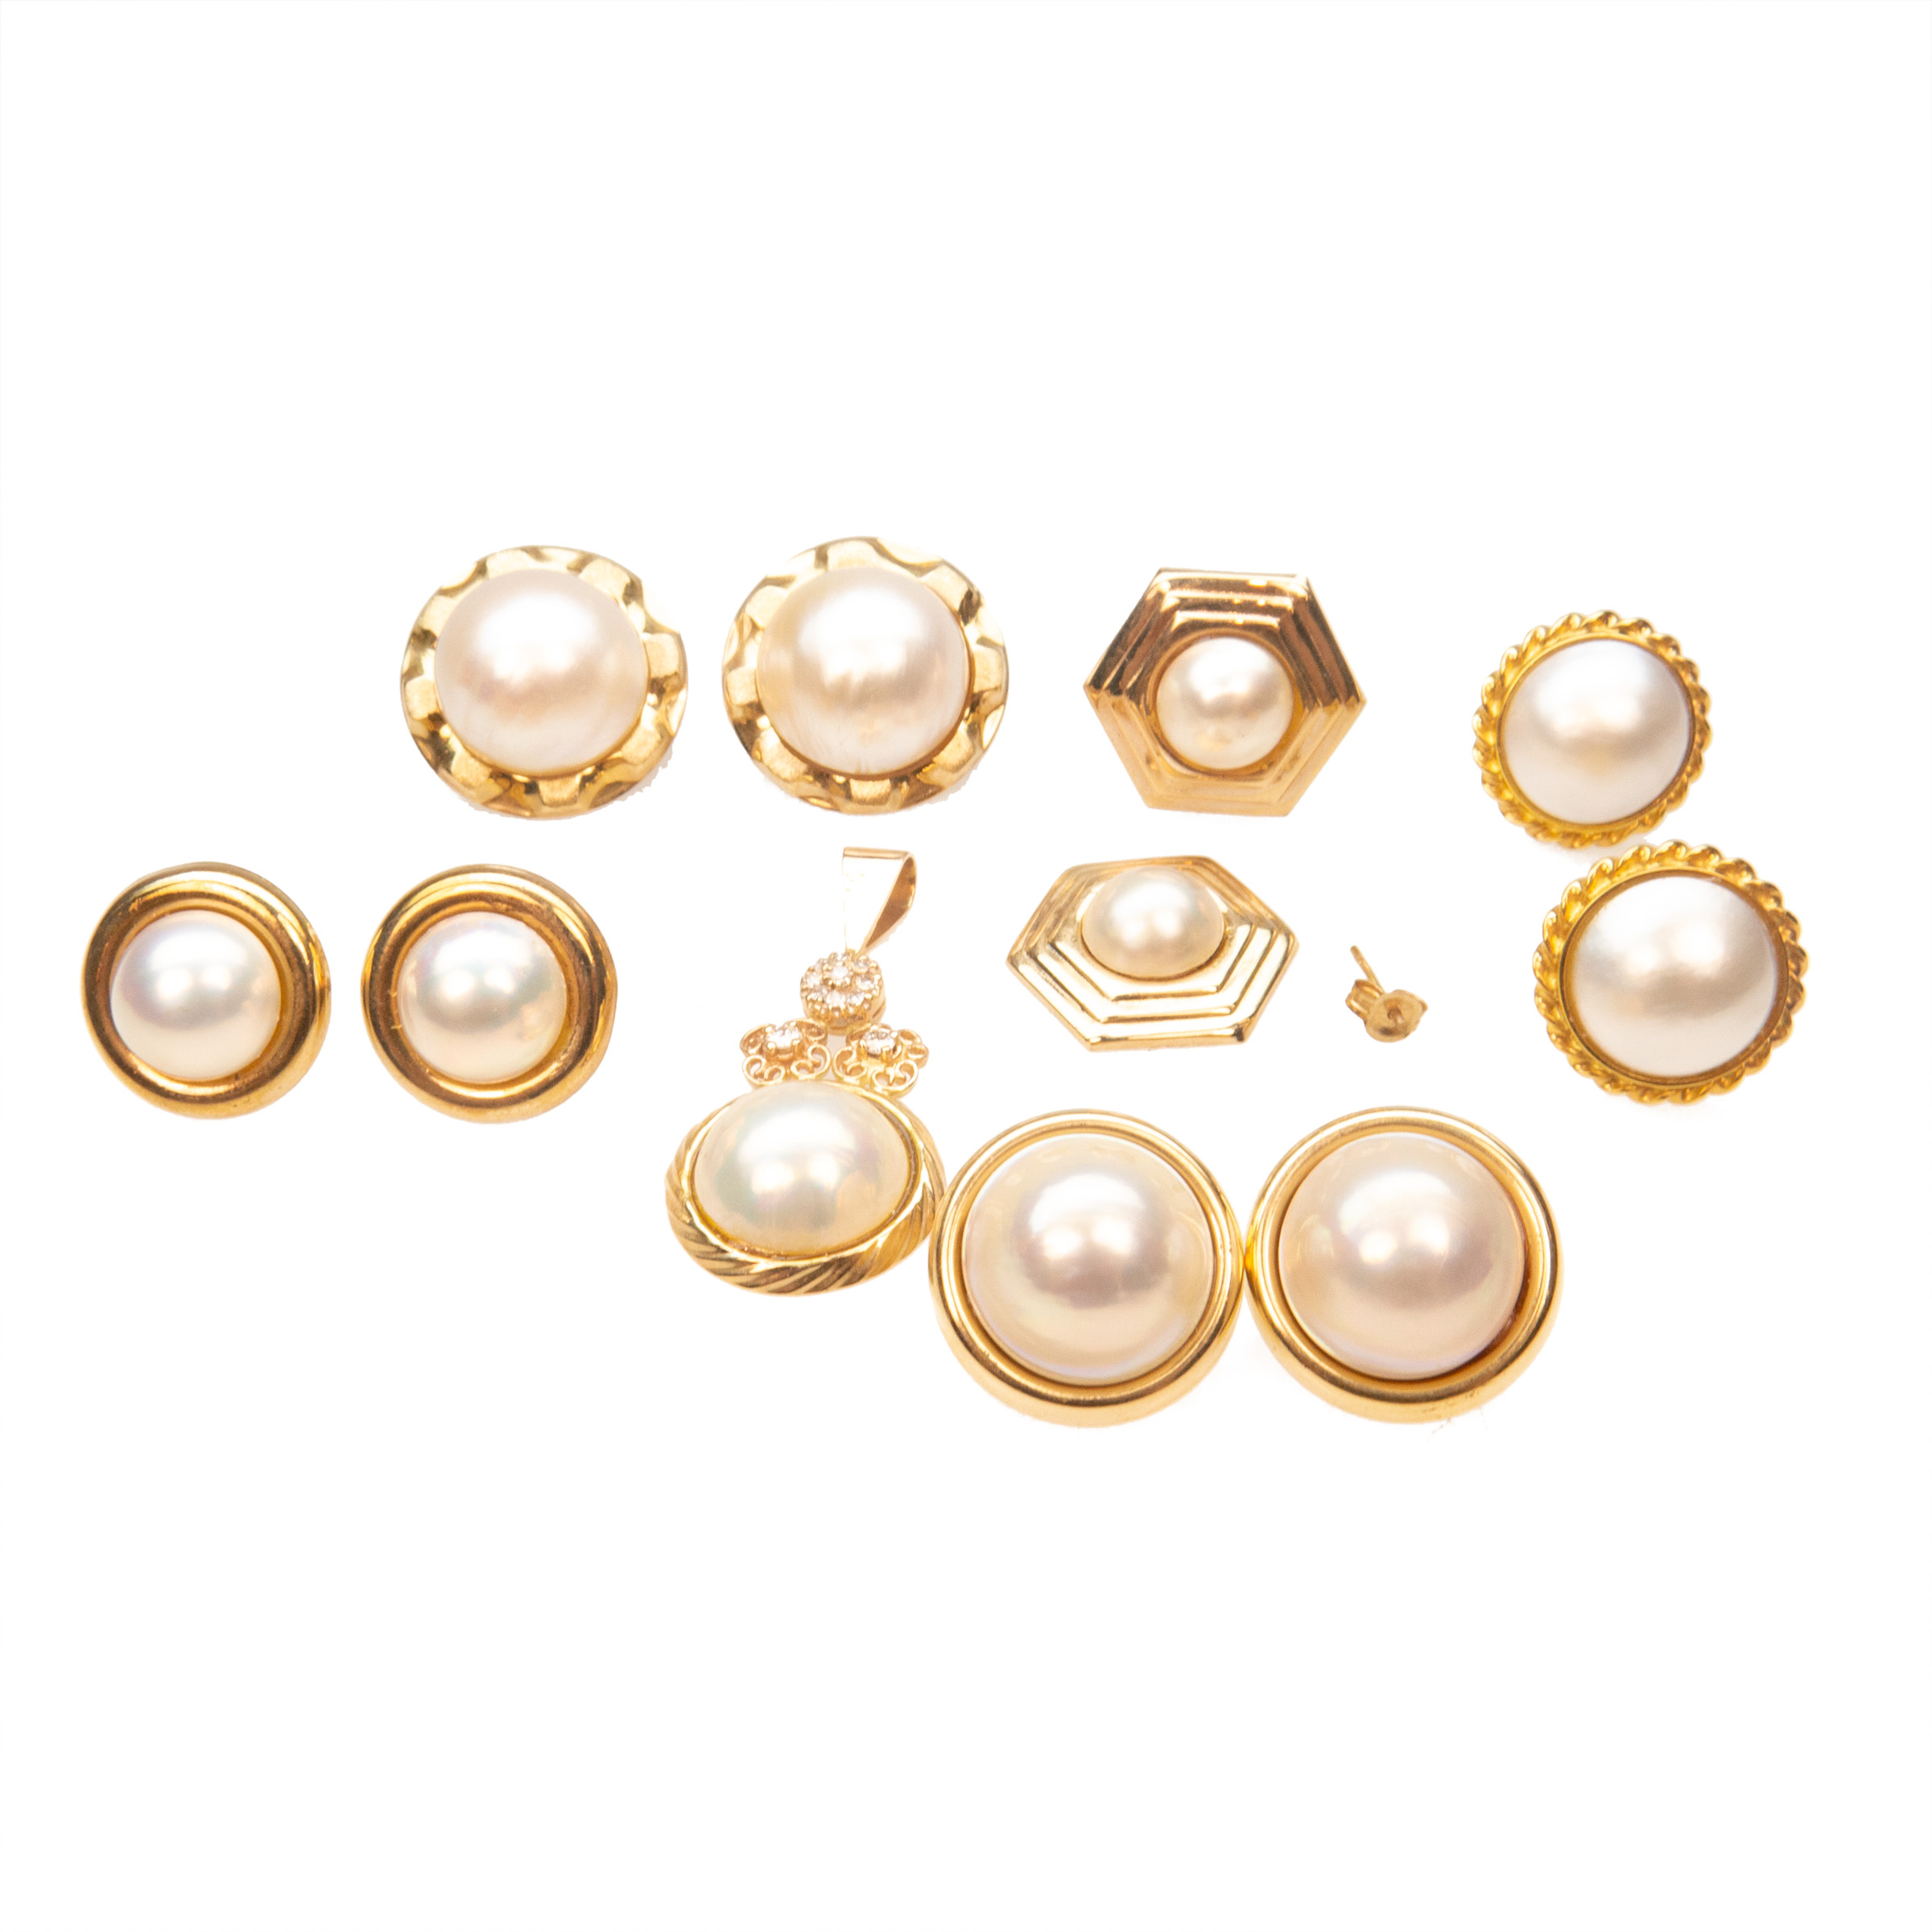 5 X Pairs Of 10K And 14K Yellow Gold Button Earrings